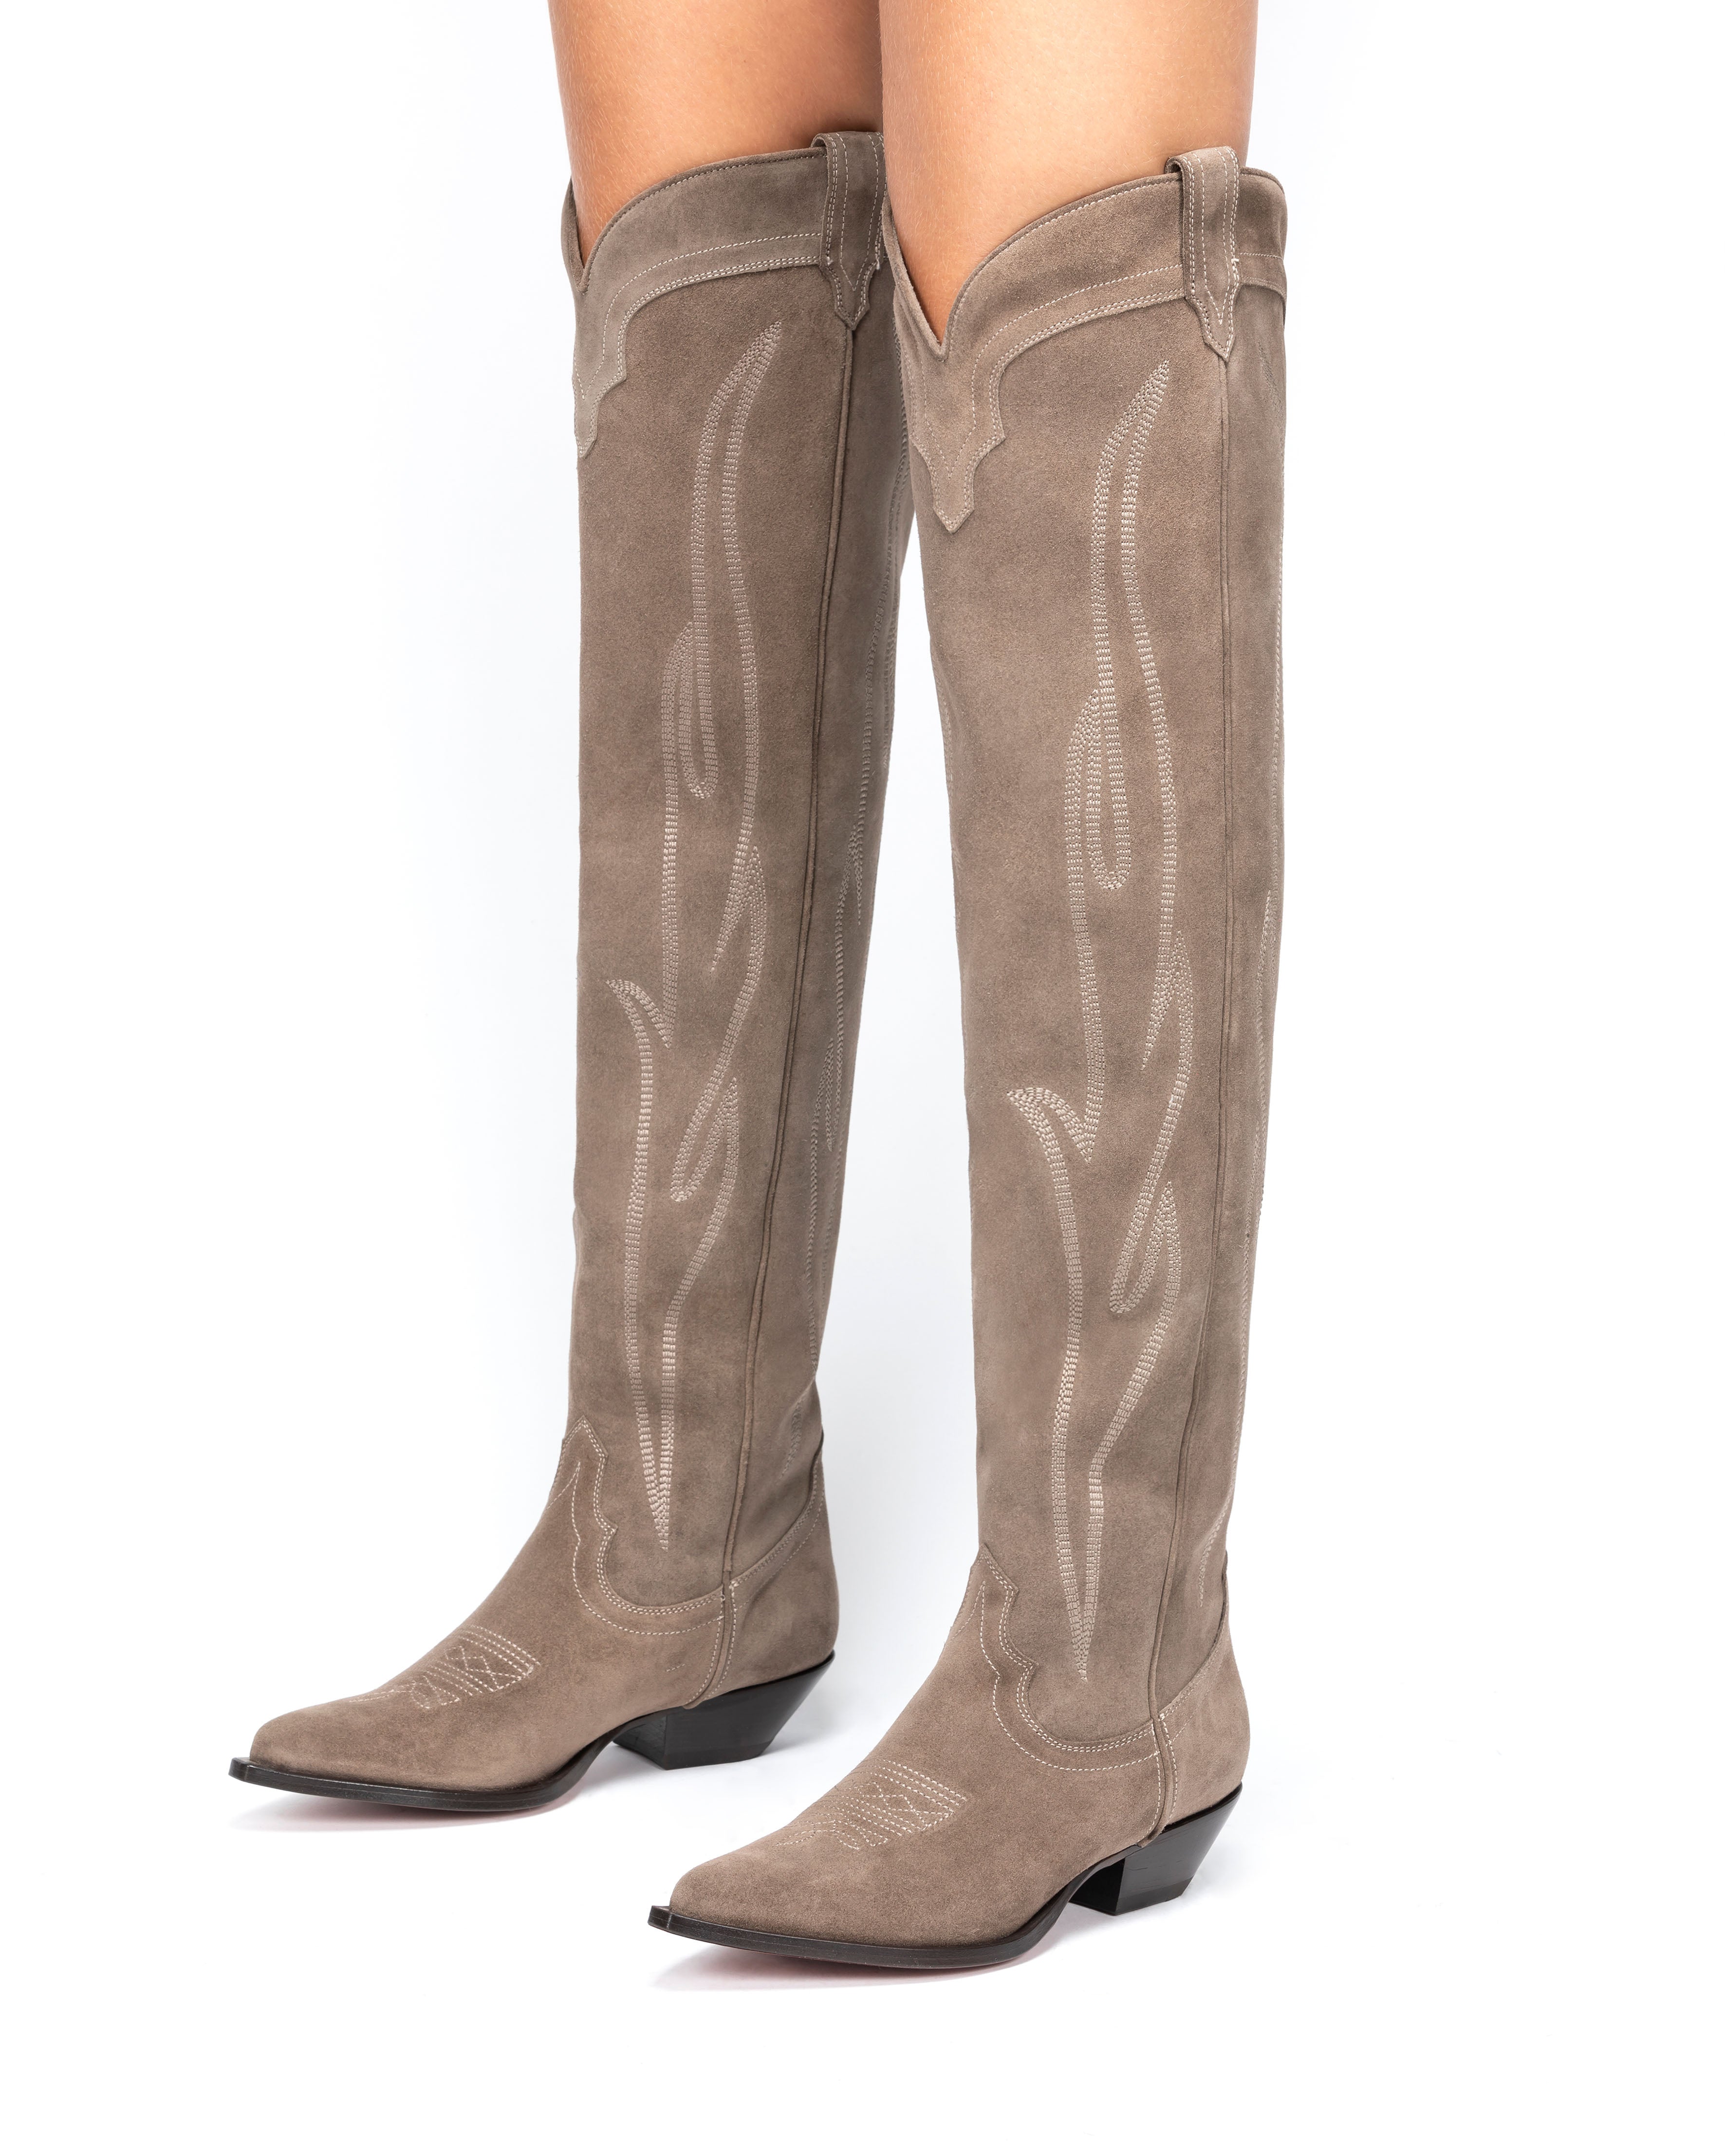 HERMOSA-Women_s-Over-The-Knee-Boots-in-Taupe-Velour-On-Tone-Embroidery_04